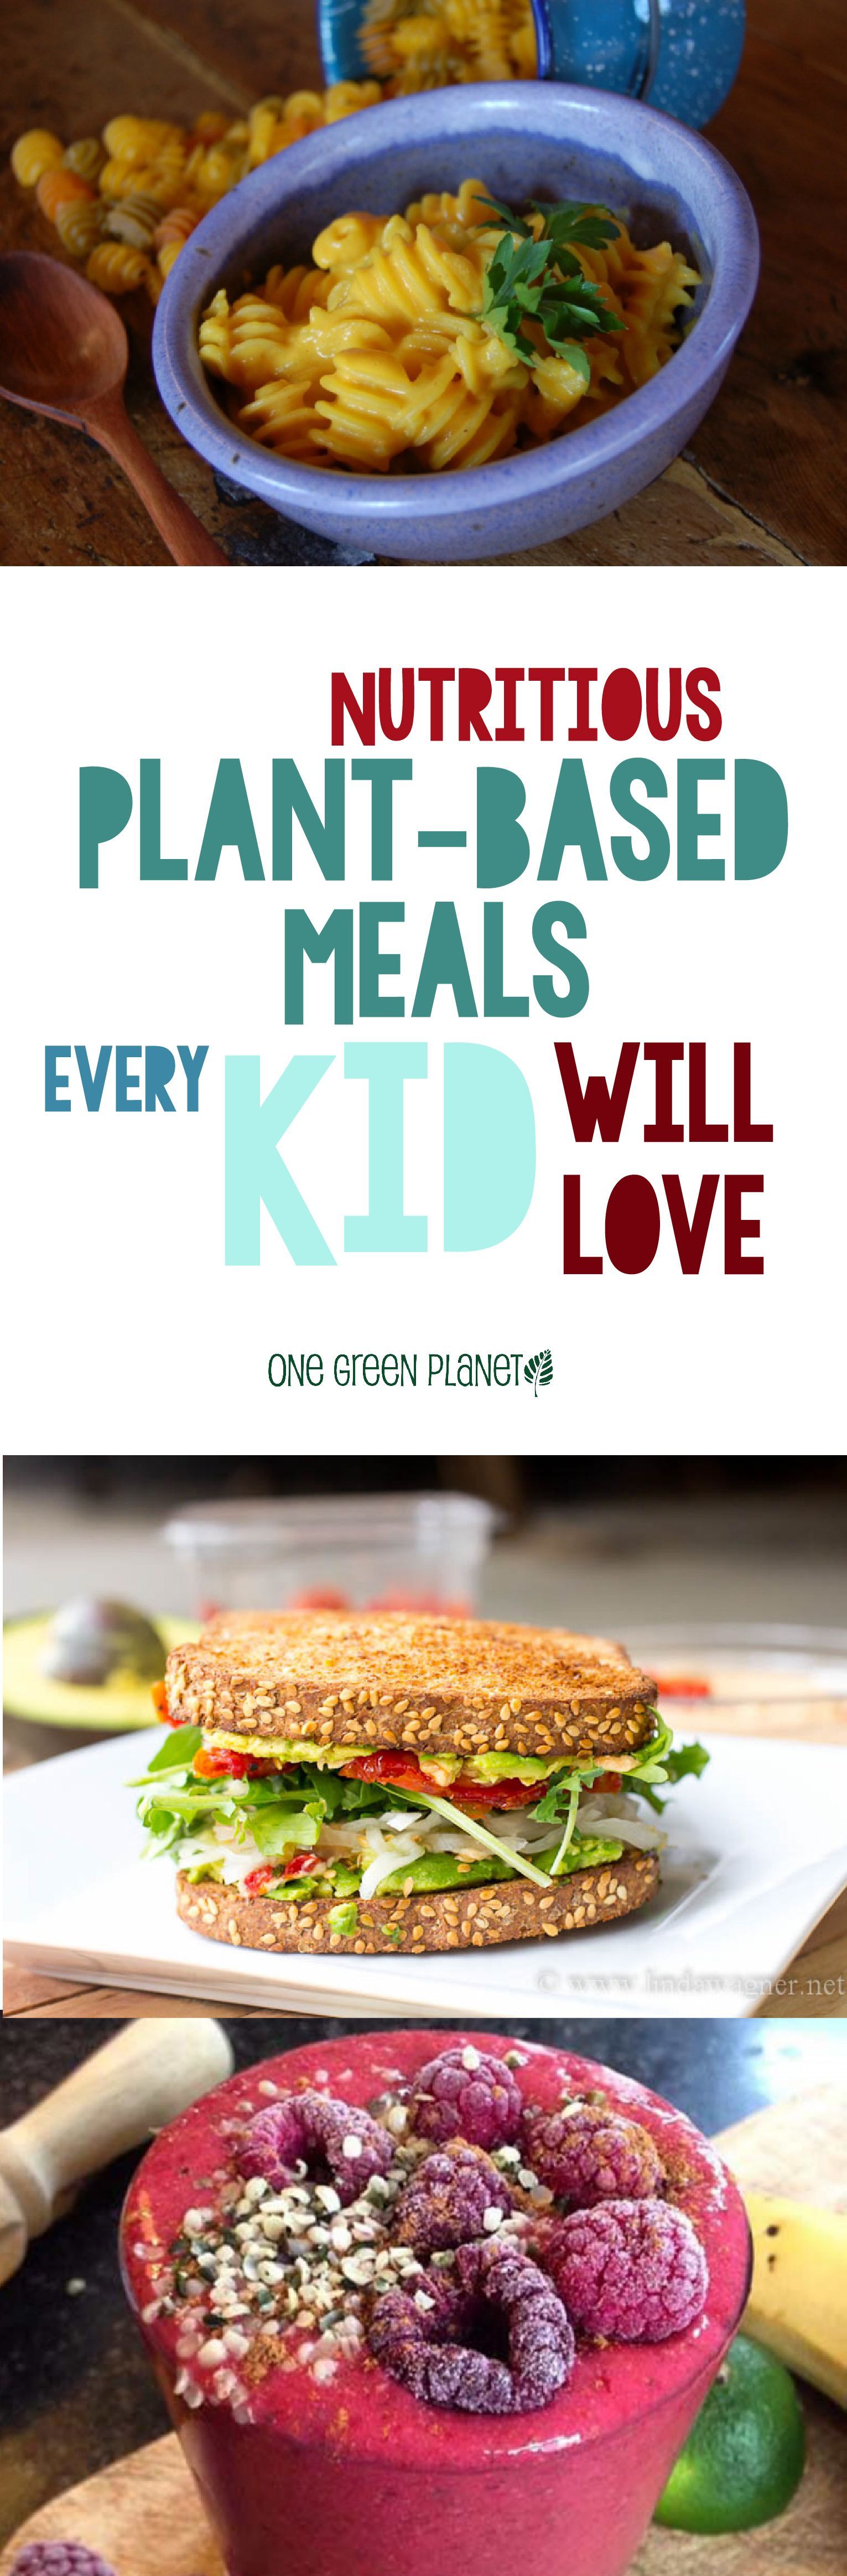 Nutritious plant based meals every kid will love #vegan_recipes_kids